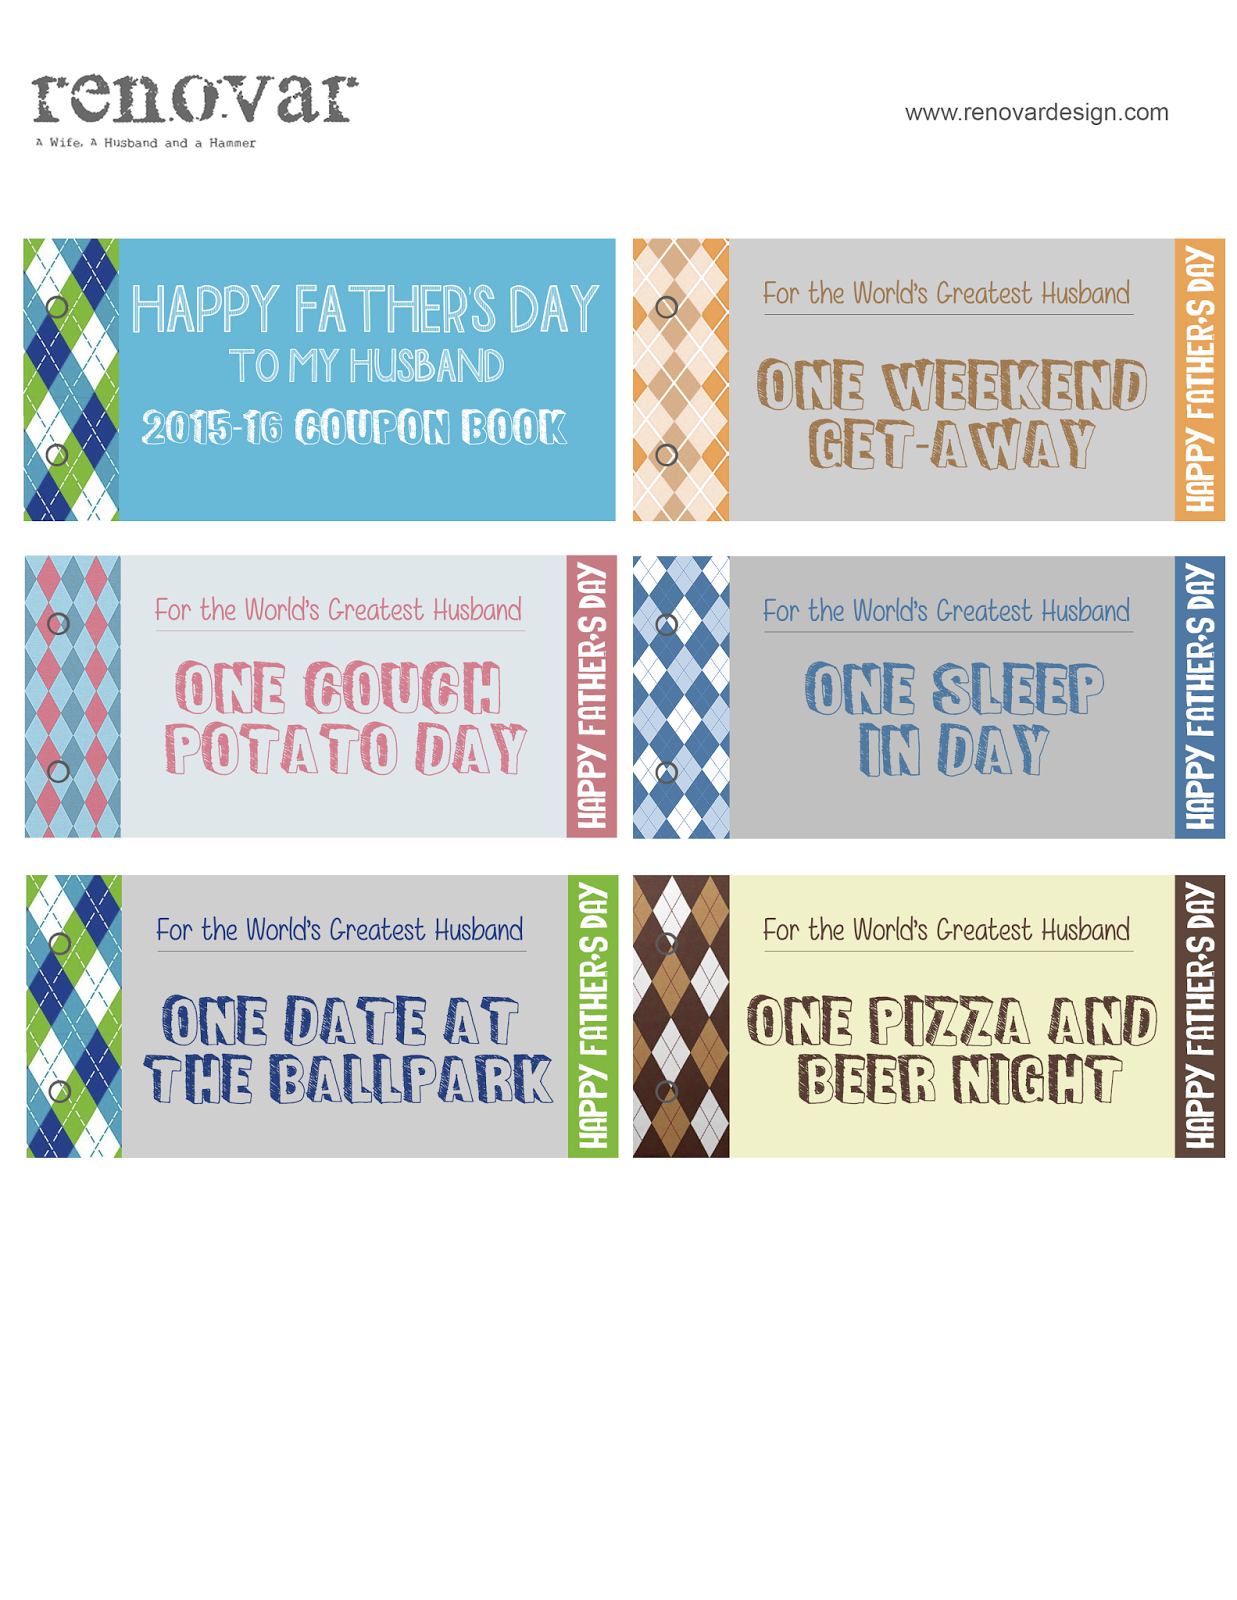 From Gardners 2 Bergers Renovar Father s Day Printable Coupon Book